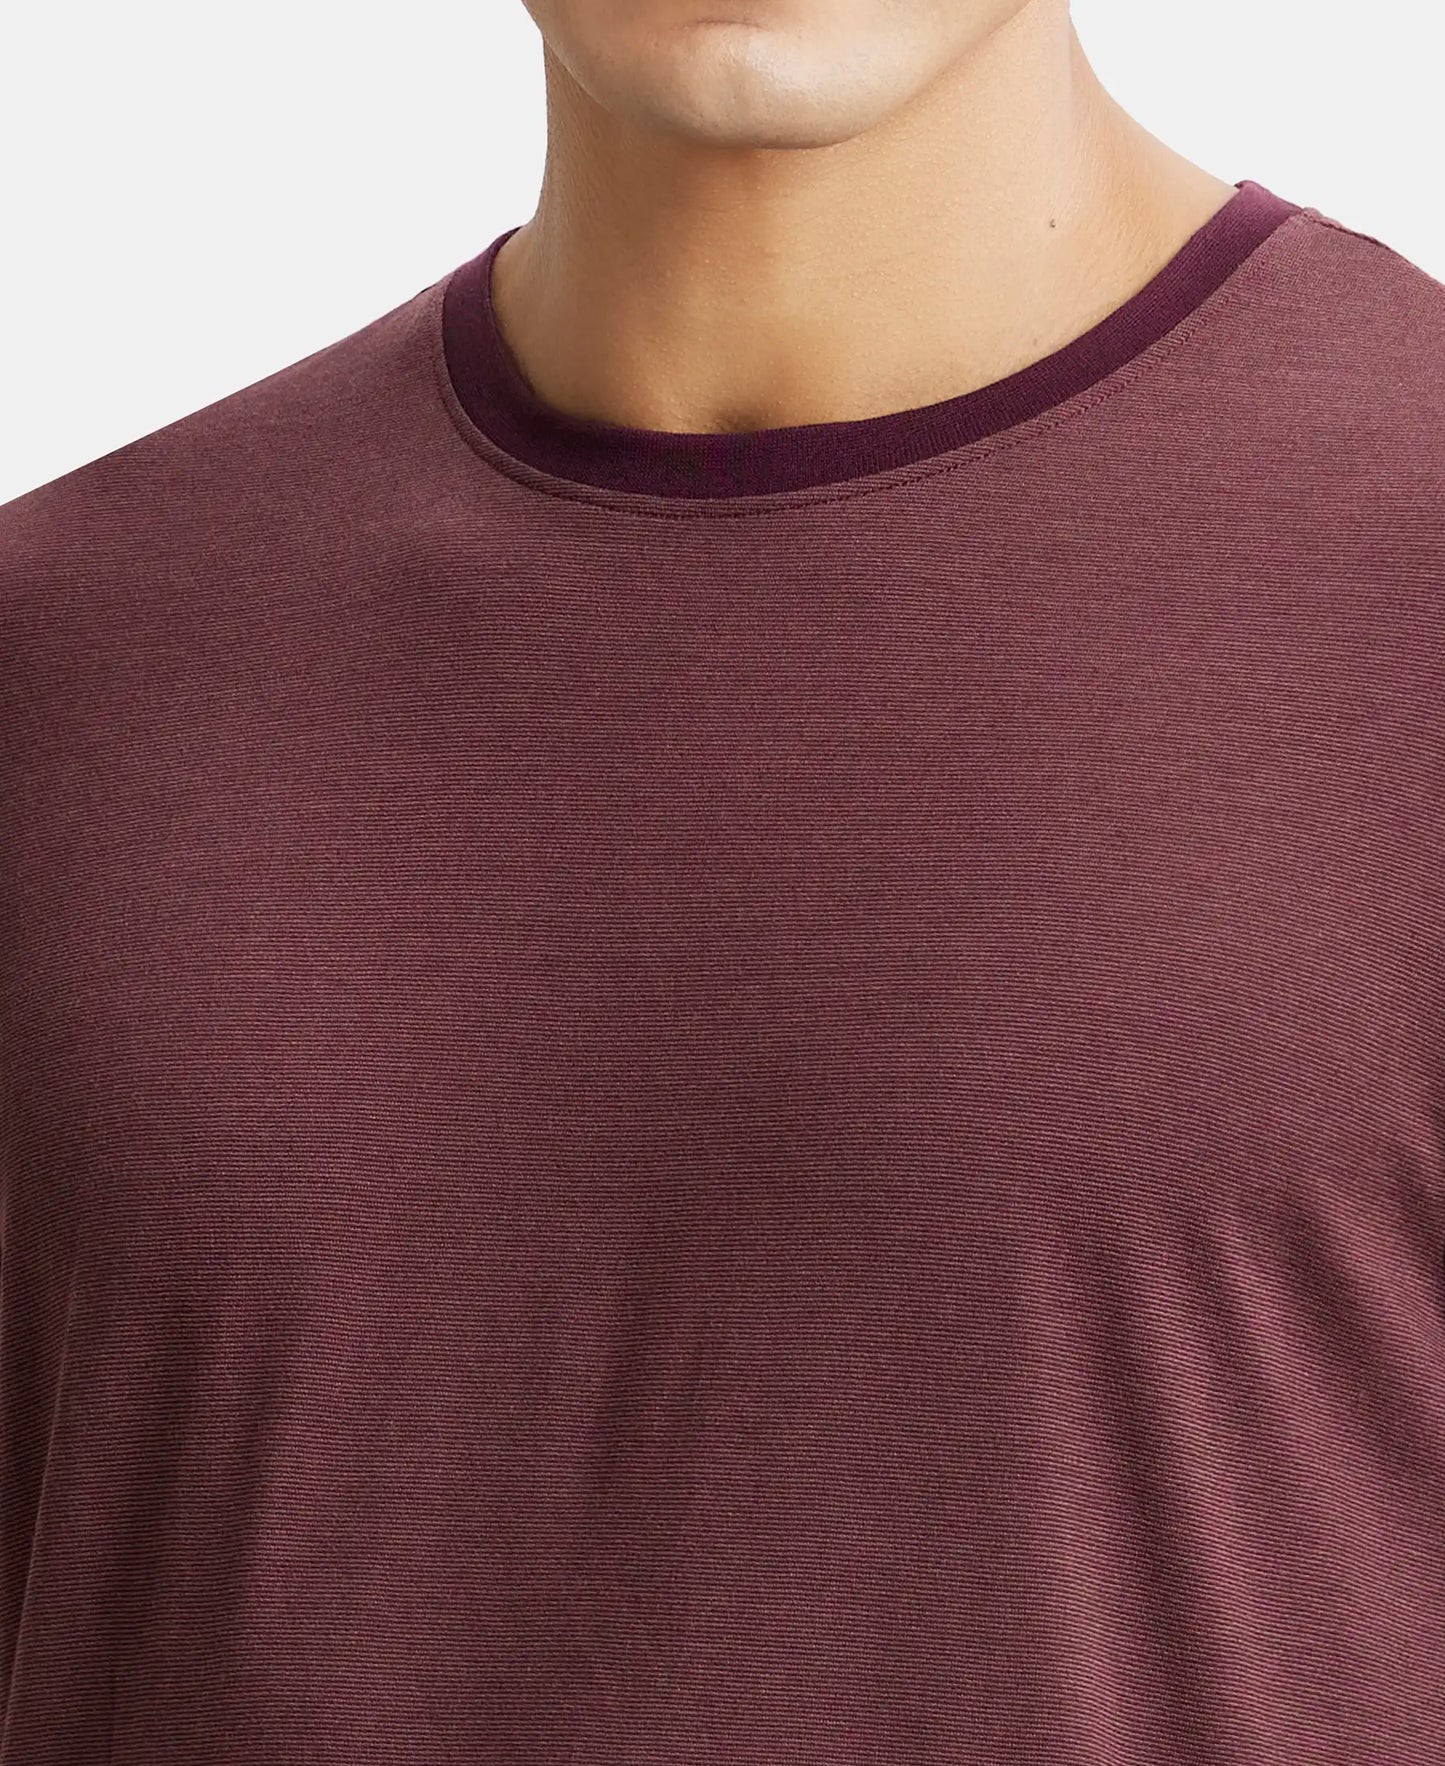 Tencel Micro Modal And Combed Cotton Blend Round Neck Half Sleeve T-Shirt - Wine tasting & Maroon-6